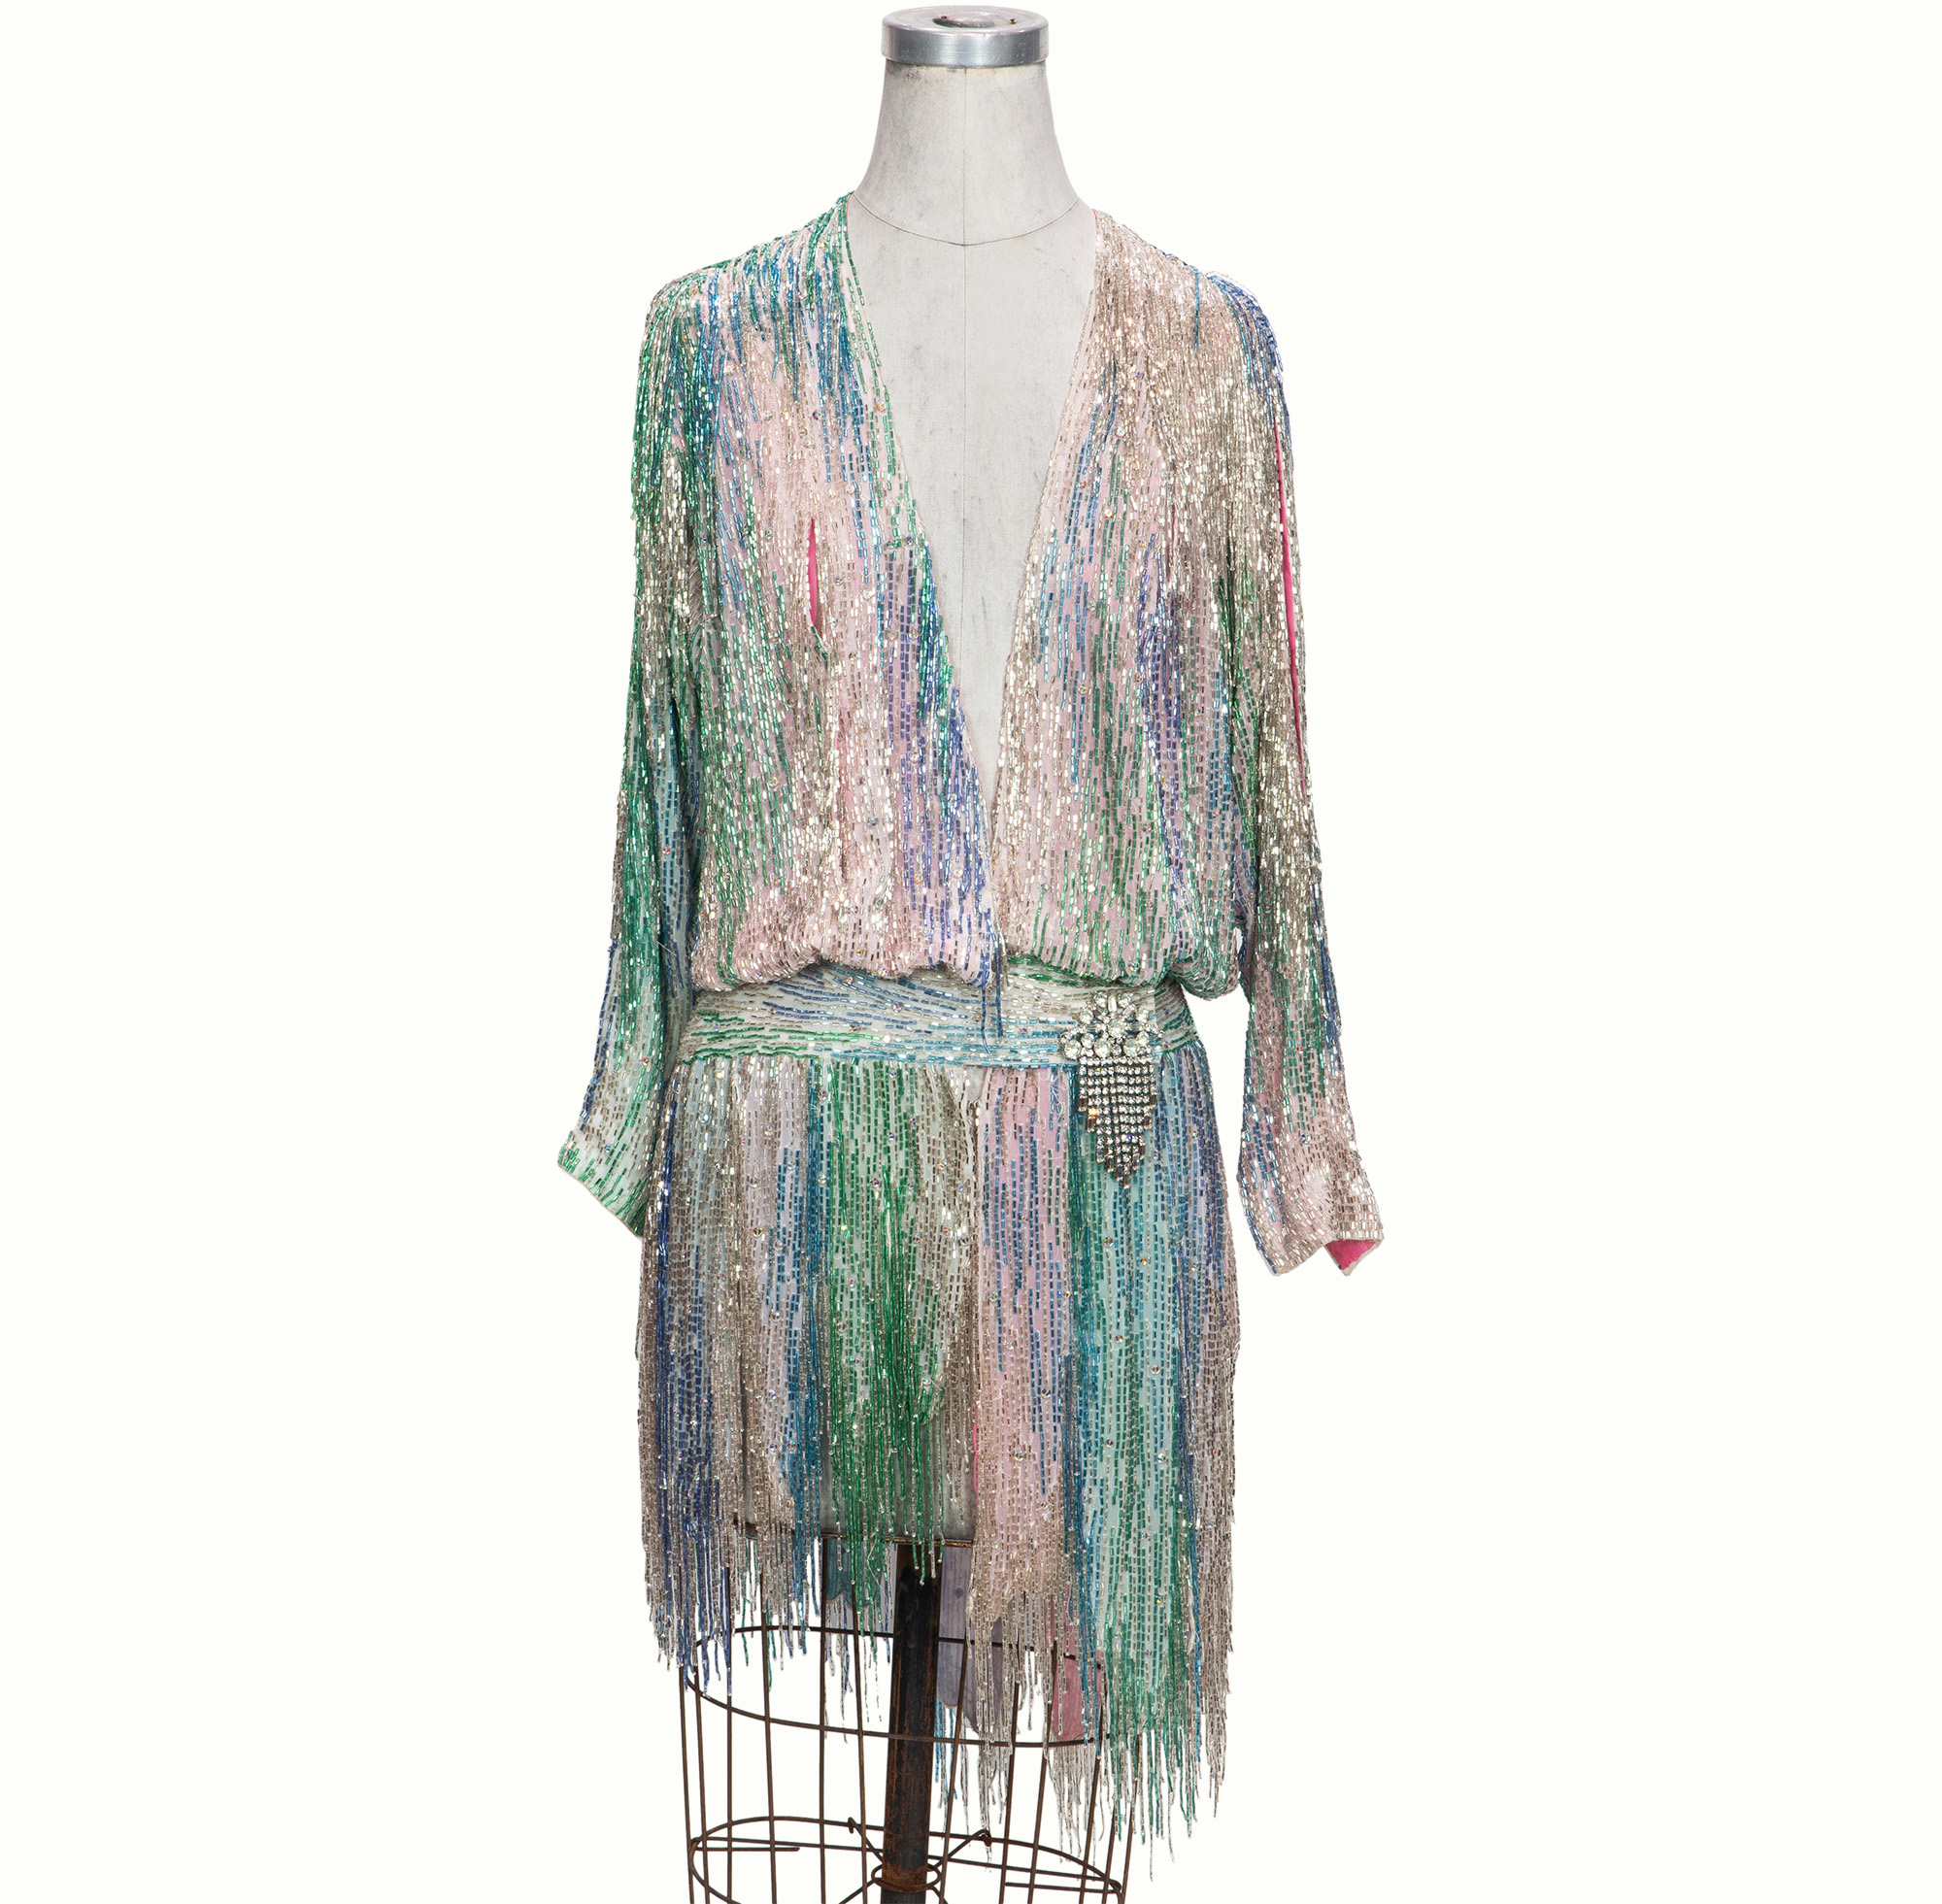 Rita Moreno, mini dress with pink and purple fringe, likely worn at the 1988 Ice Capades T.V. Special.